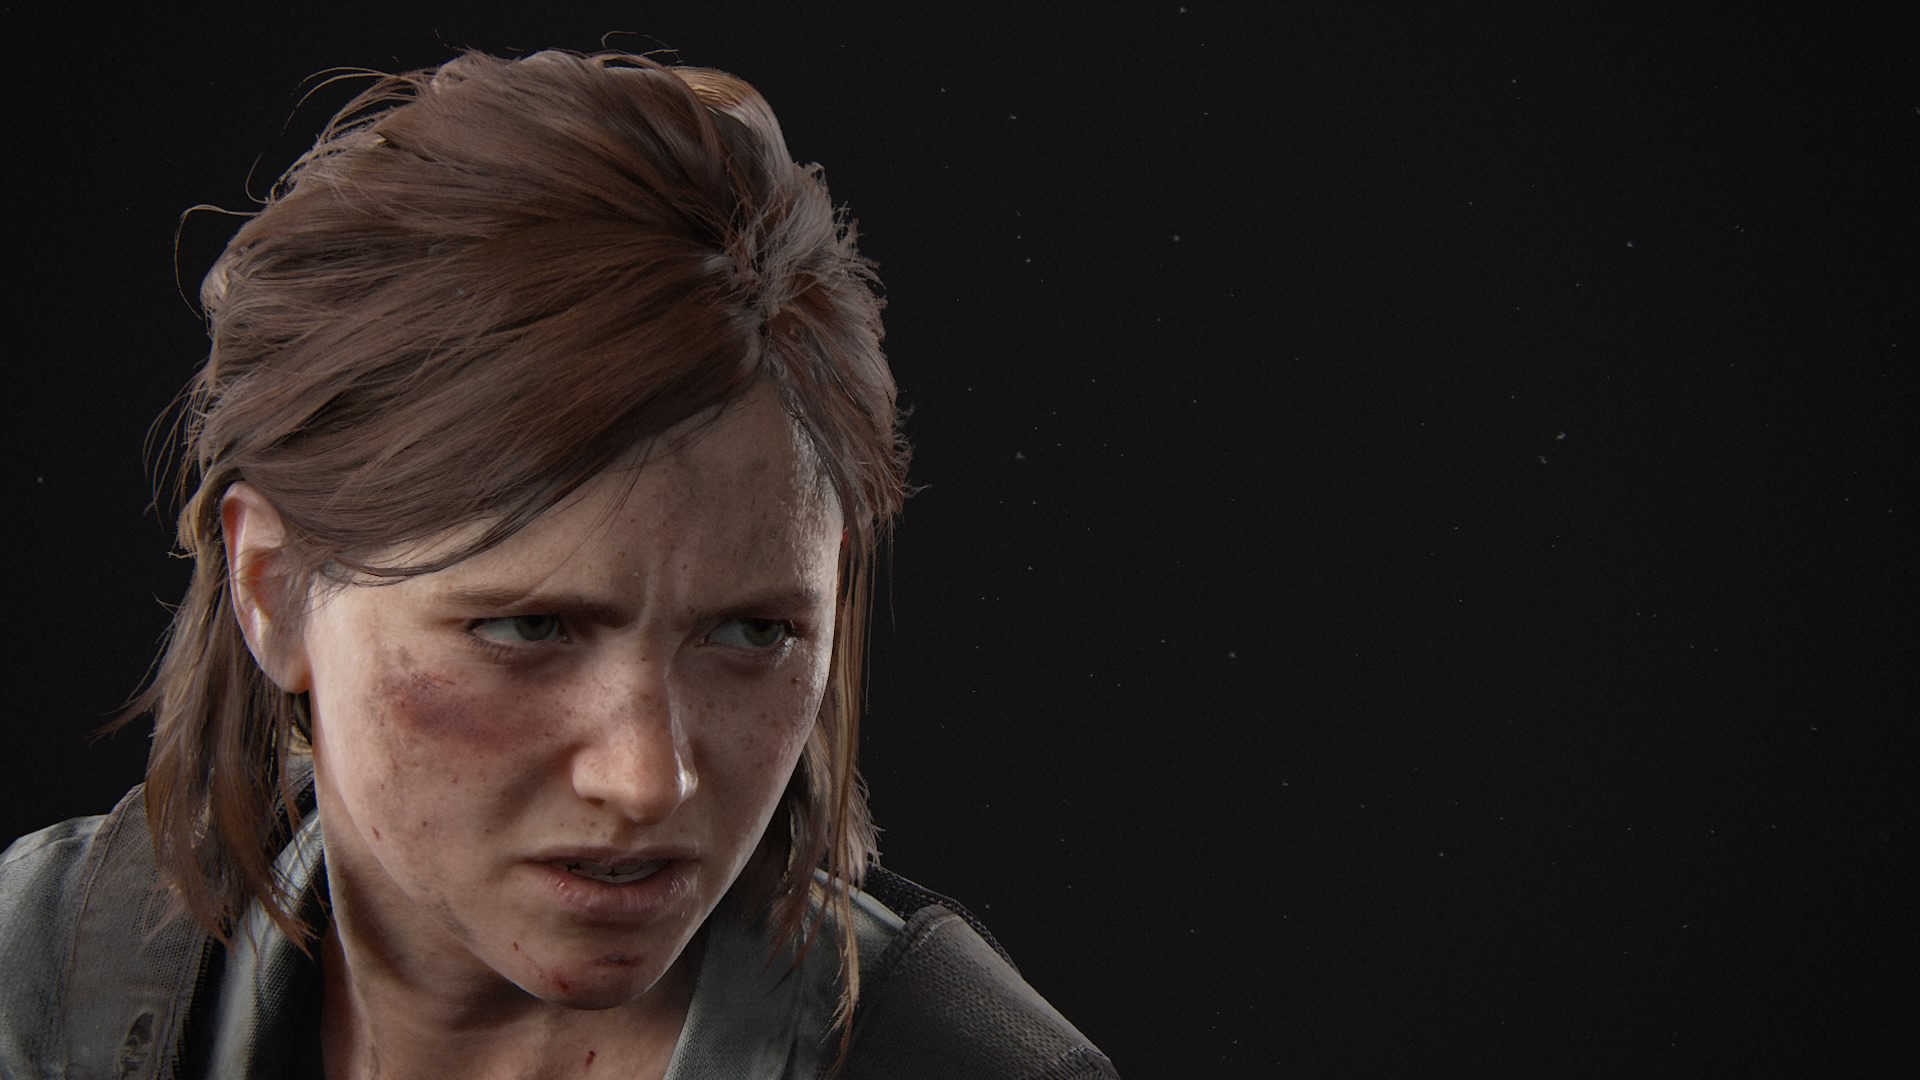 The Last Of Us 2 PlayStation 4 Ellie Naughty Dog Protagonist Video Game Girls Video Games 1920x1080